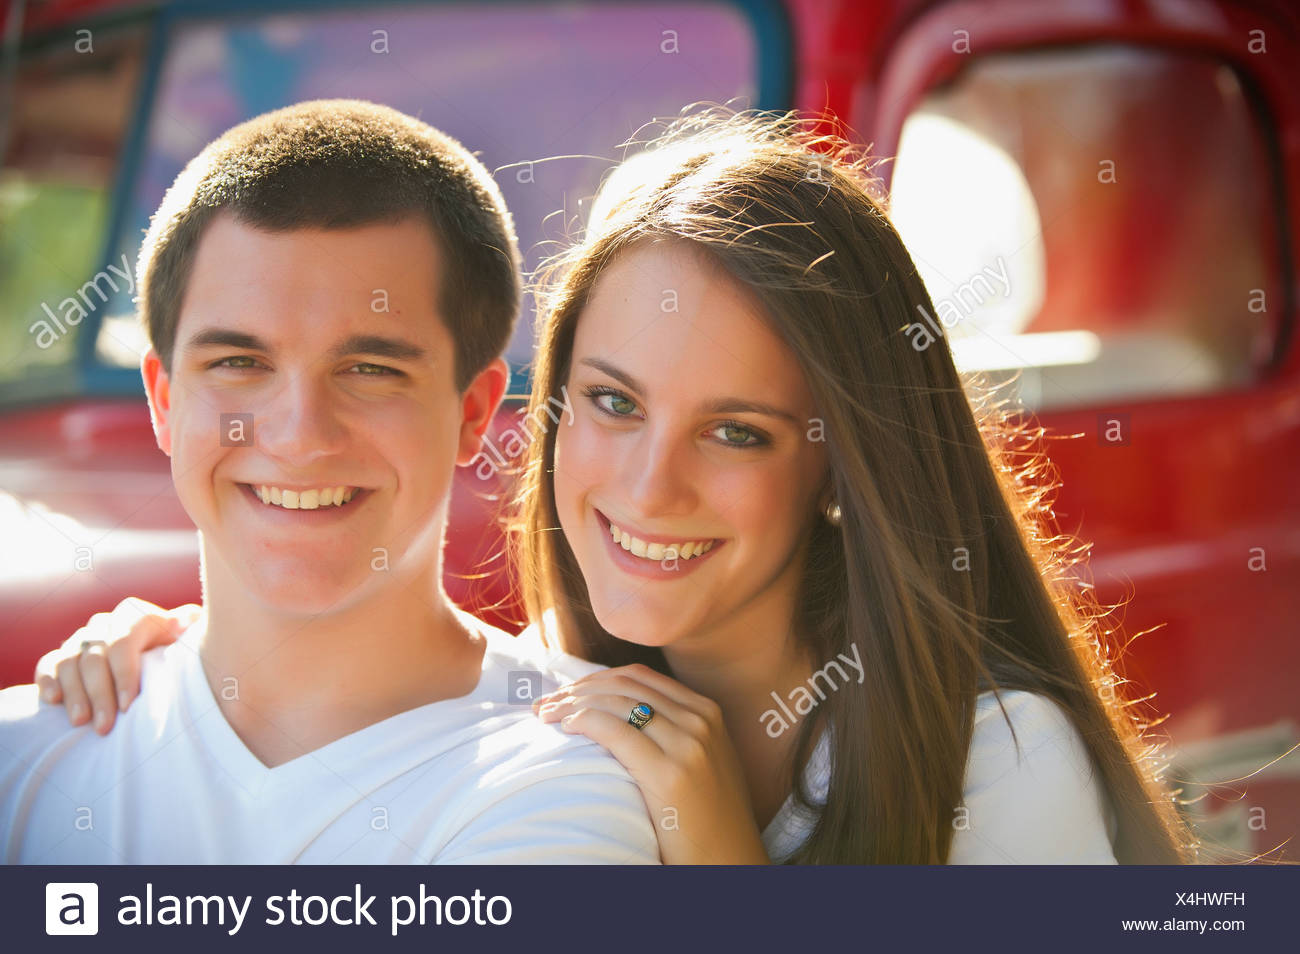 Fraternal Twins Boy Girl High Resolution Stock Photography And Images Alamy